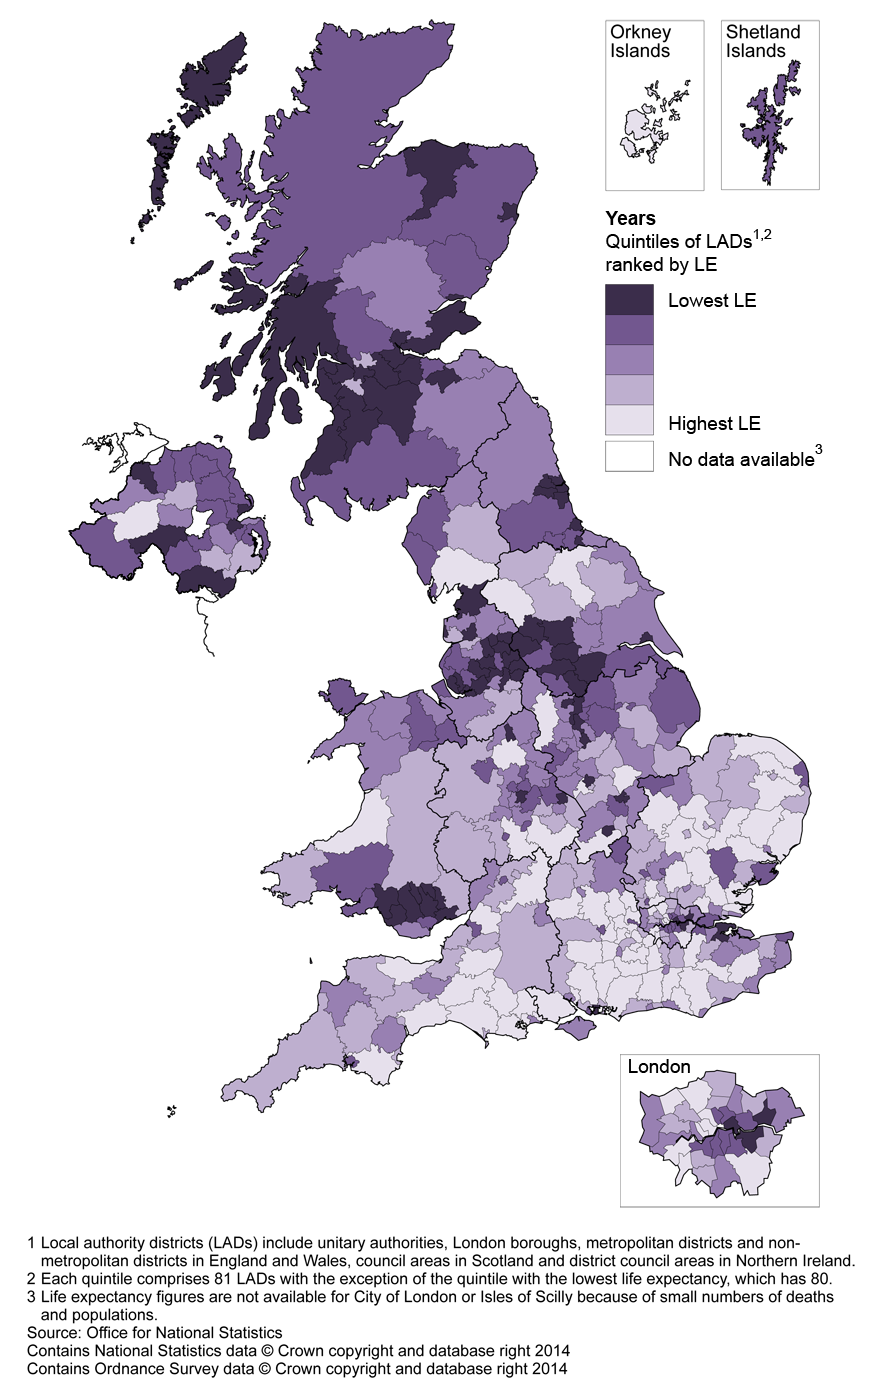 Map 3: Life expectancy (LE) for males at age 65 by local authority district, United Kingdom, 2010–12